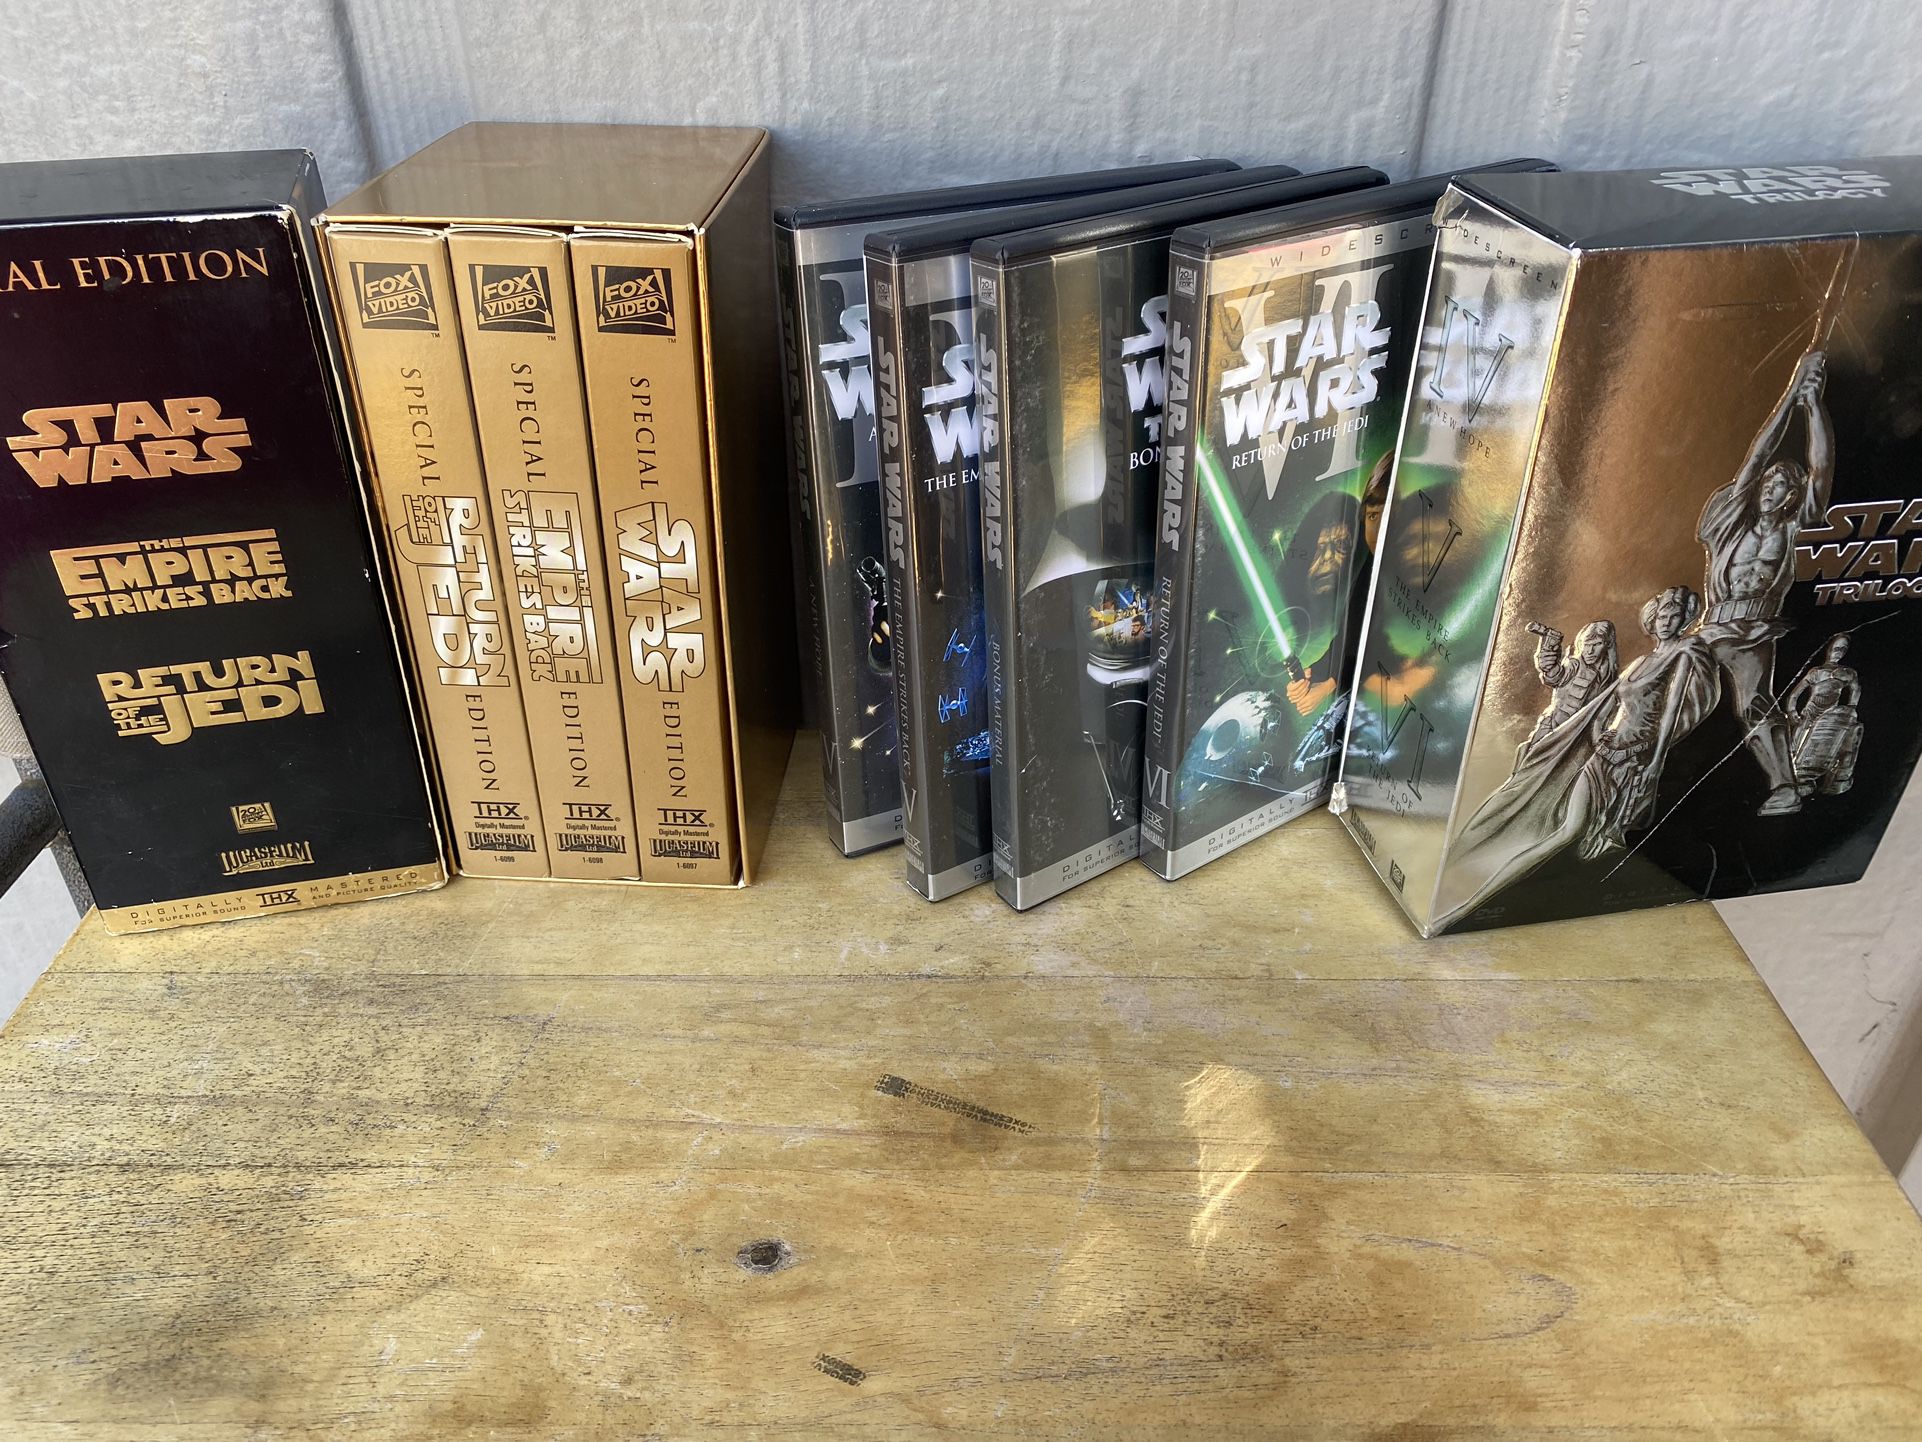 Star Wars DVD’s And VHS formats- Collectors Editions 